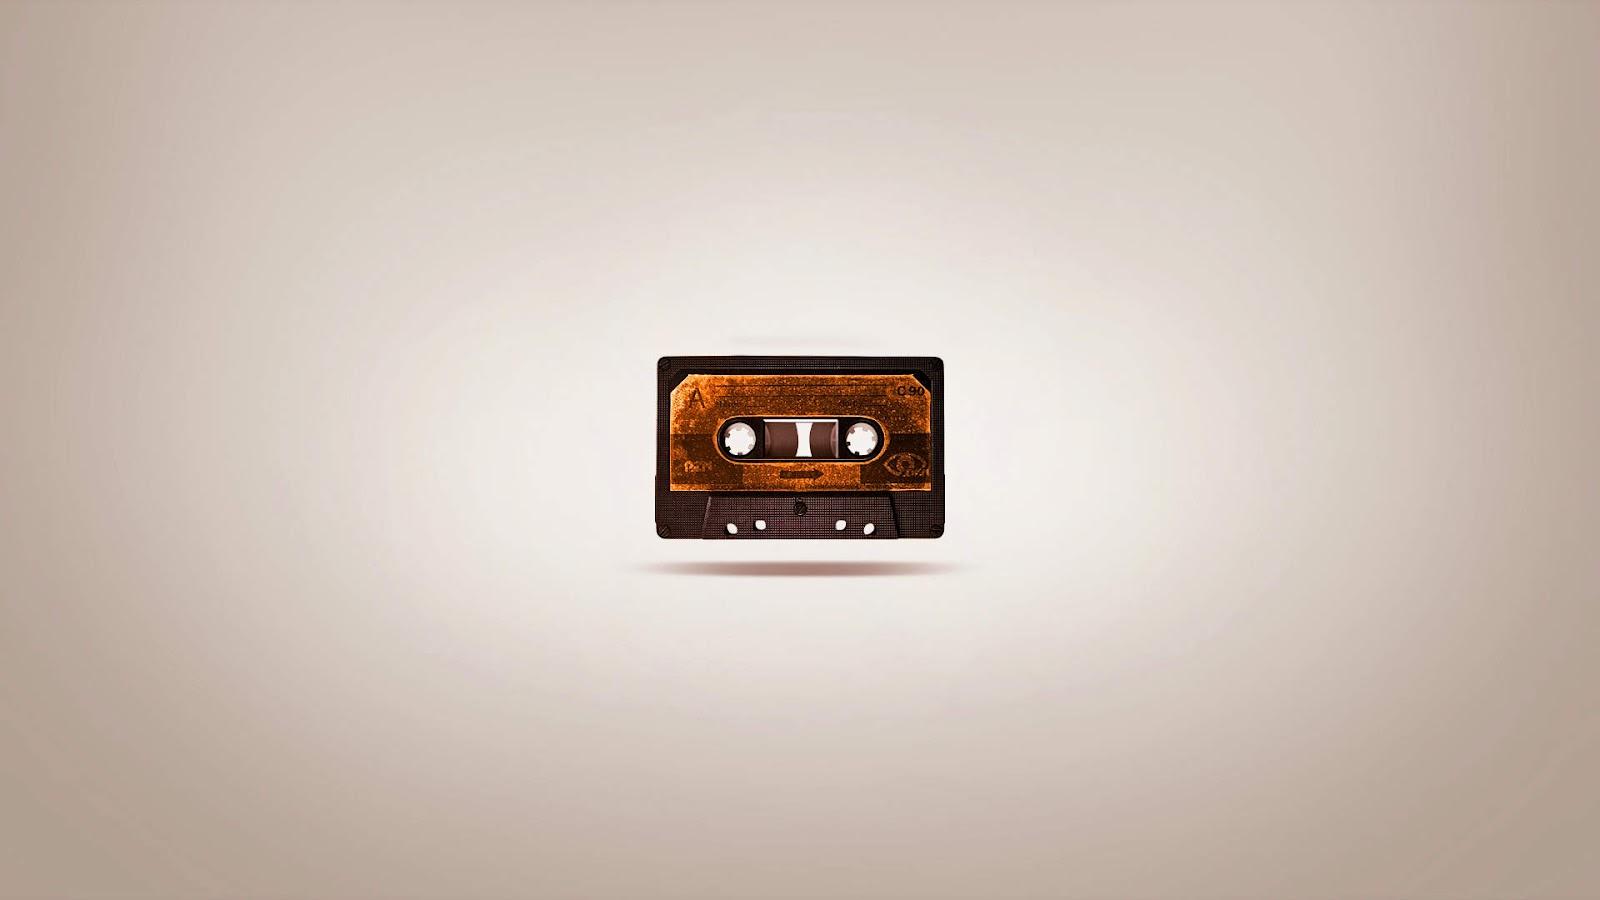 Cassette Tape Wallpaper. Tape Wallpaper, Mixtape Background Graphics and Guardians of the Galaxy Tape Deck Wallpaper